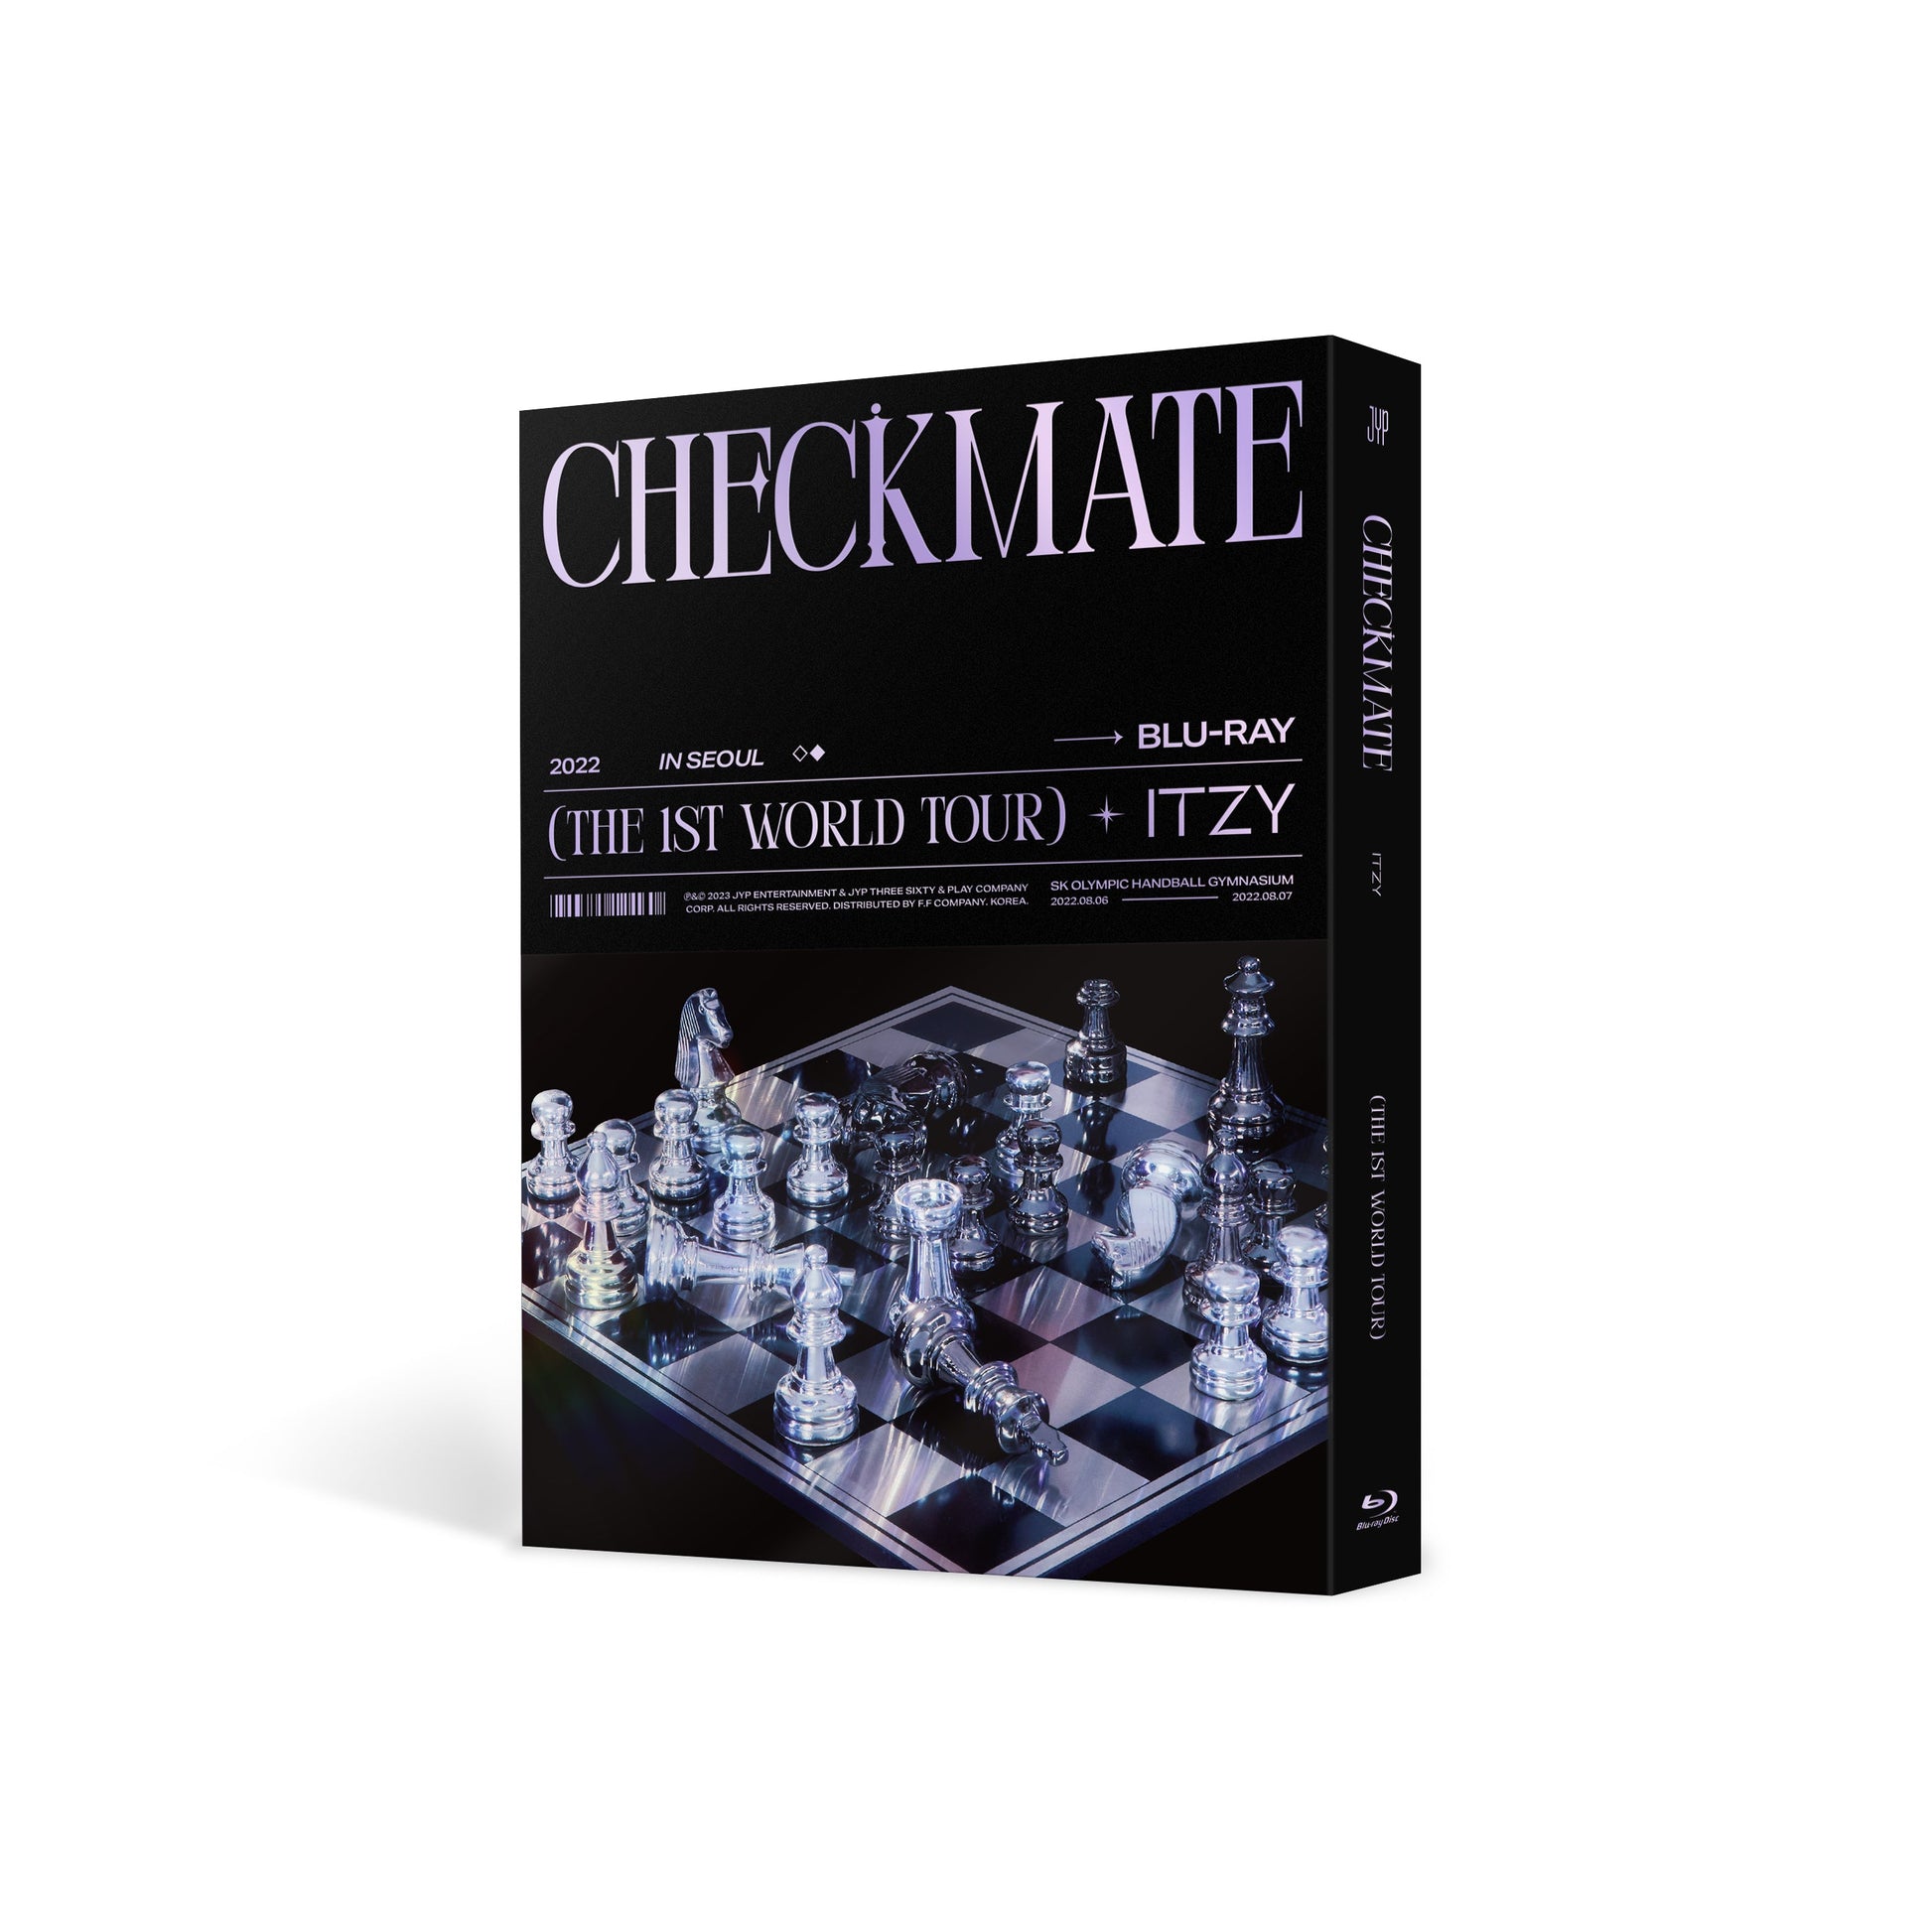 ITZY 2022 World Tour In Seoul 'Checkmate' (Blu-Ray) l PLAY KPOP CAFE